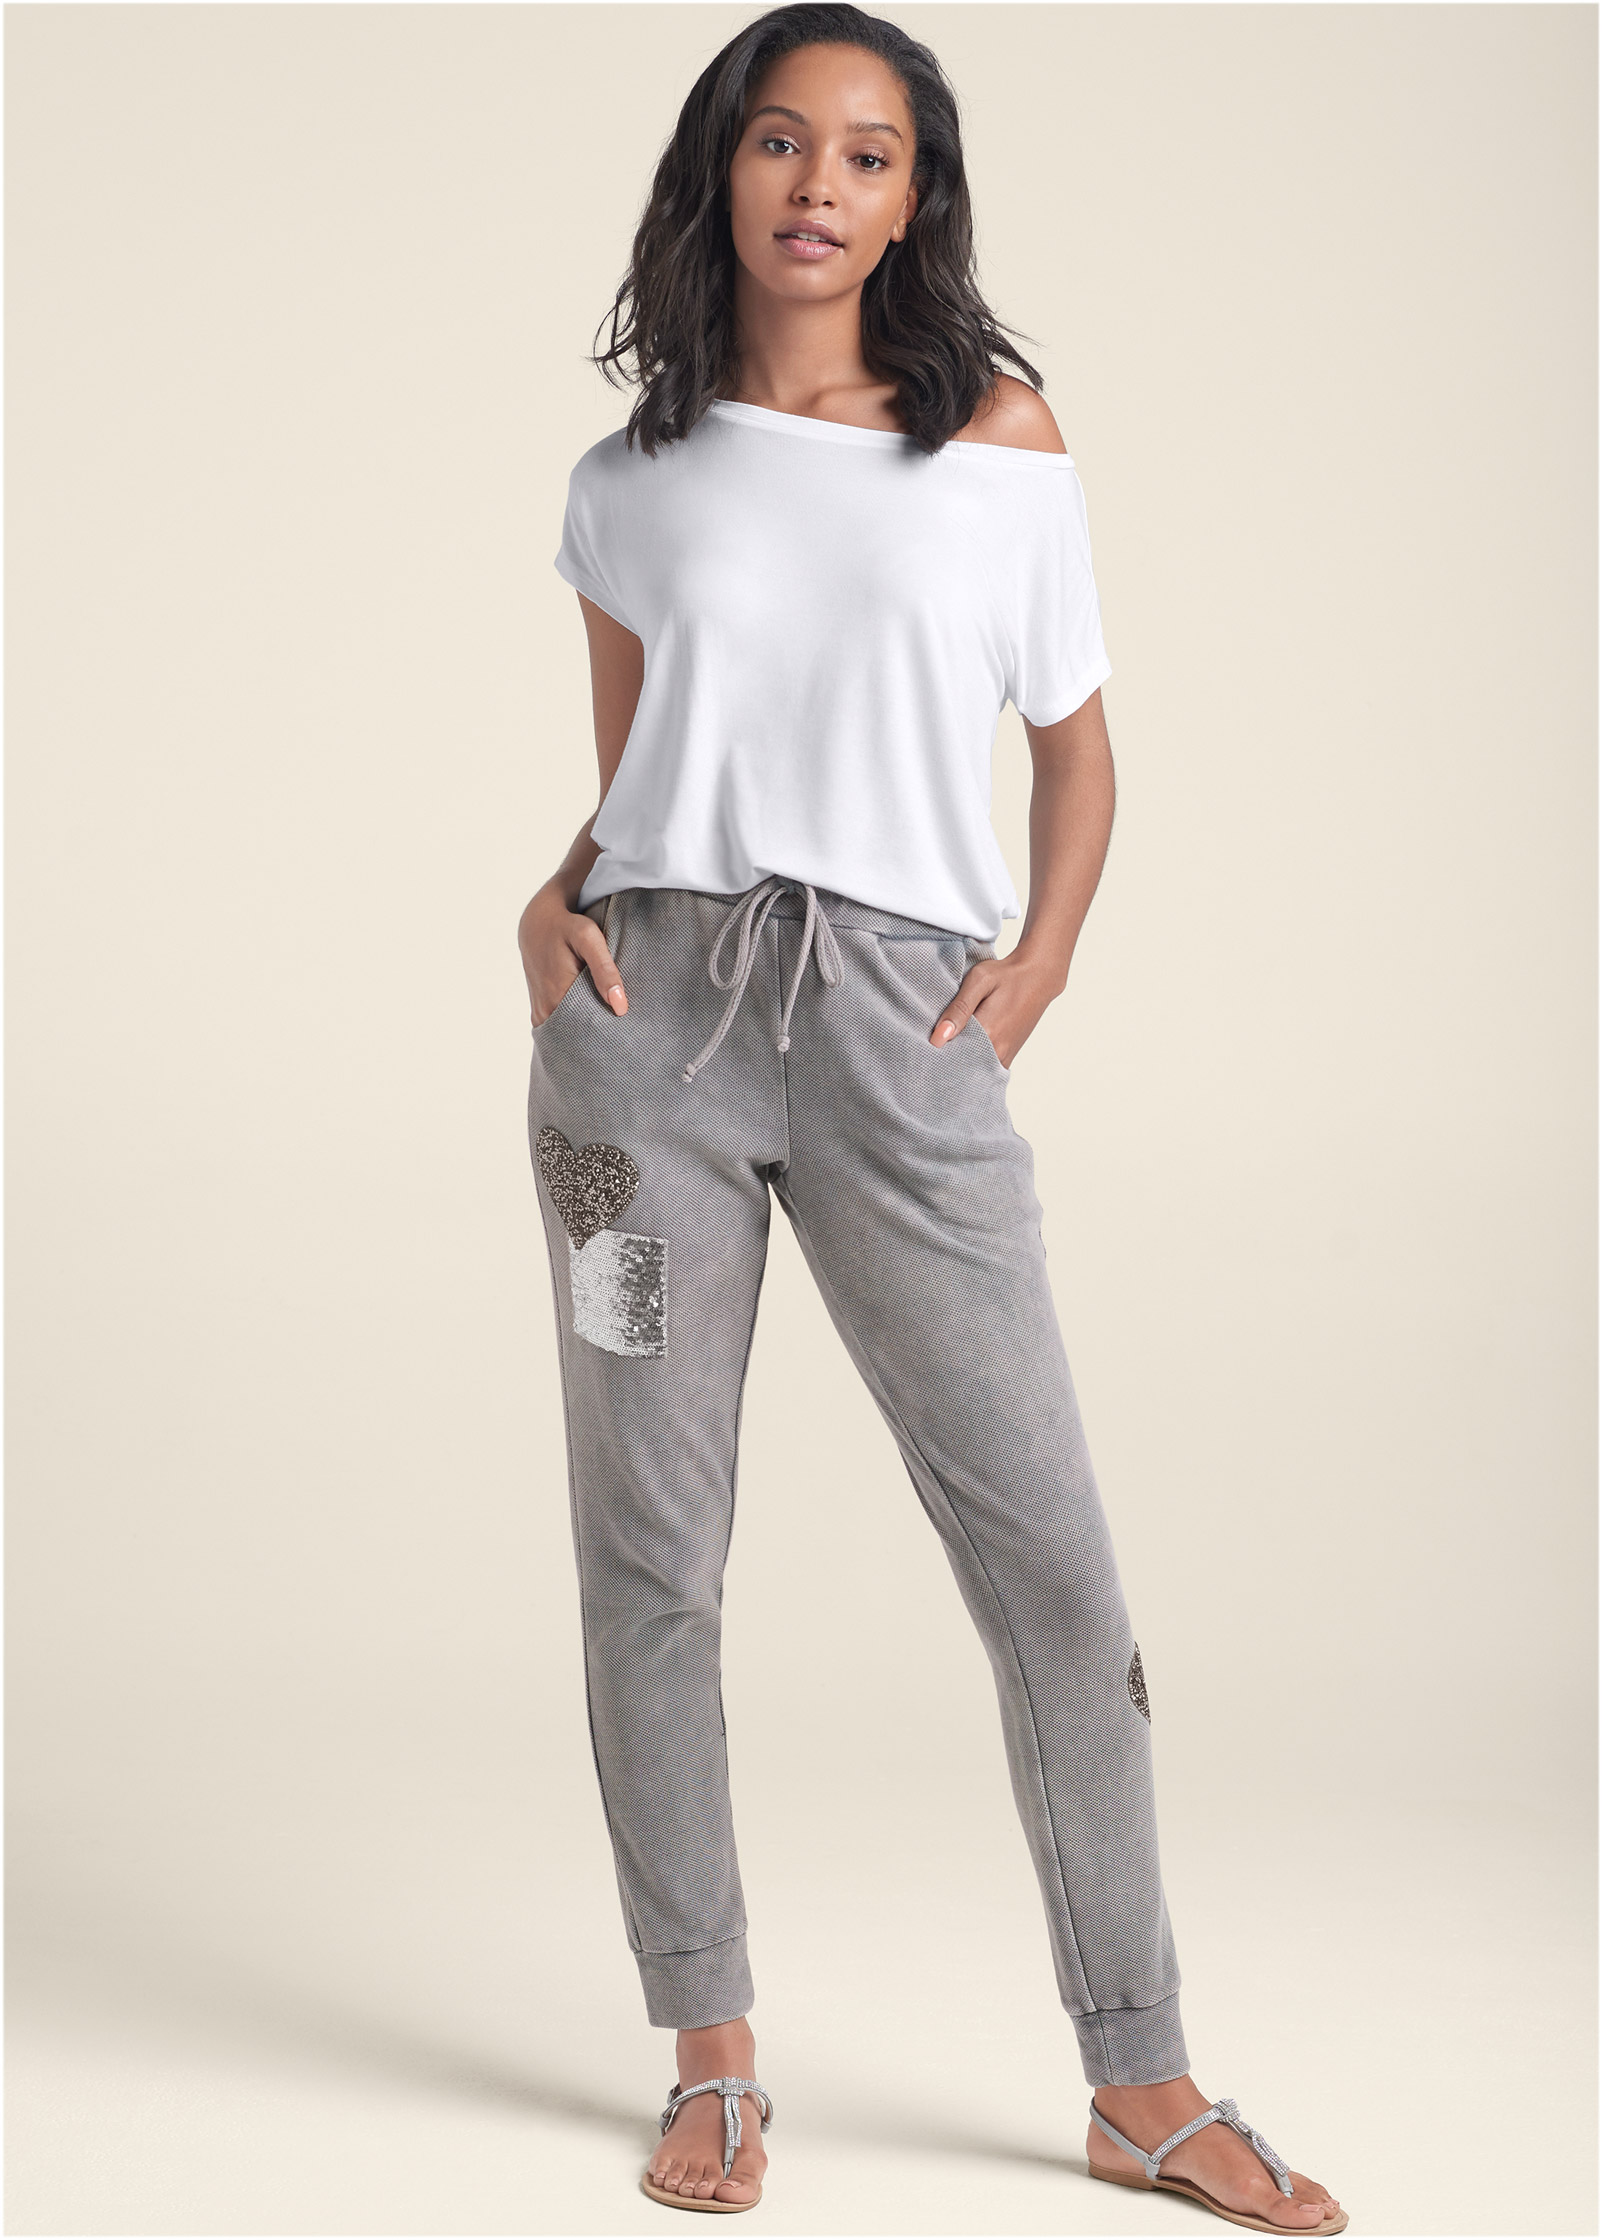 TEXTURED SPARKLE JOGGERS in Grey | VENUS